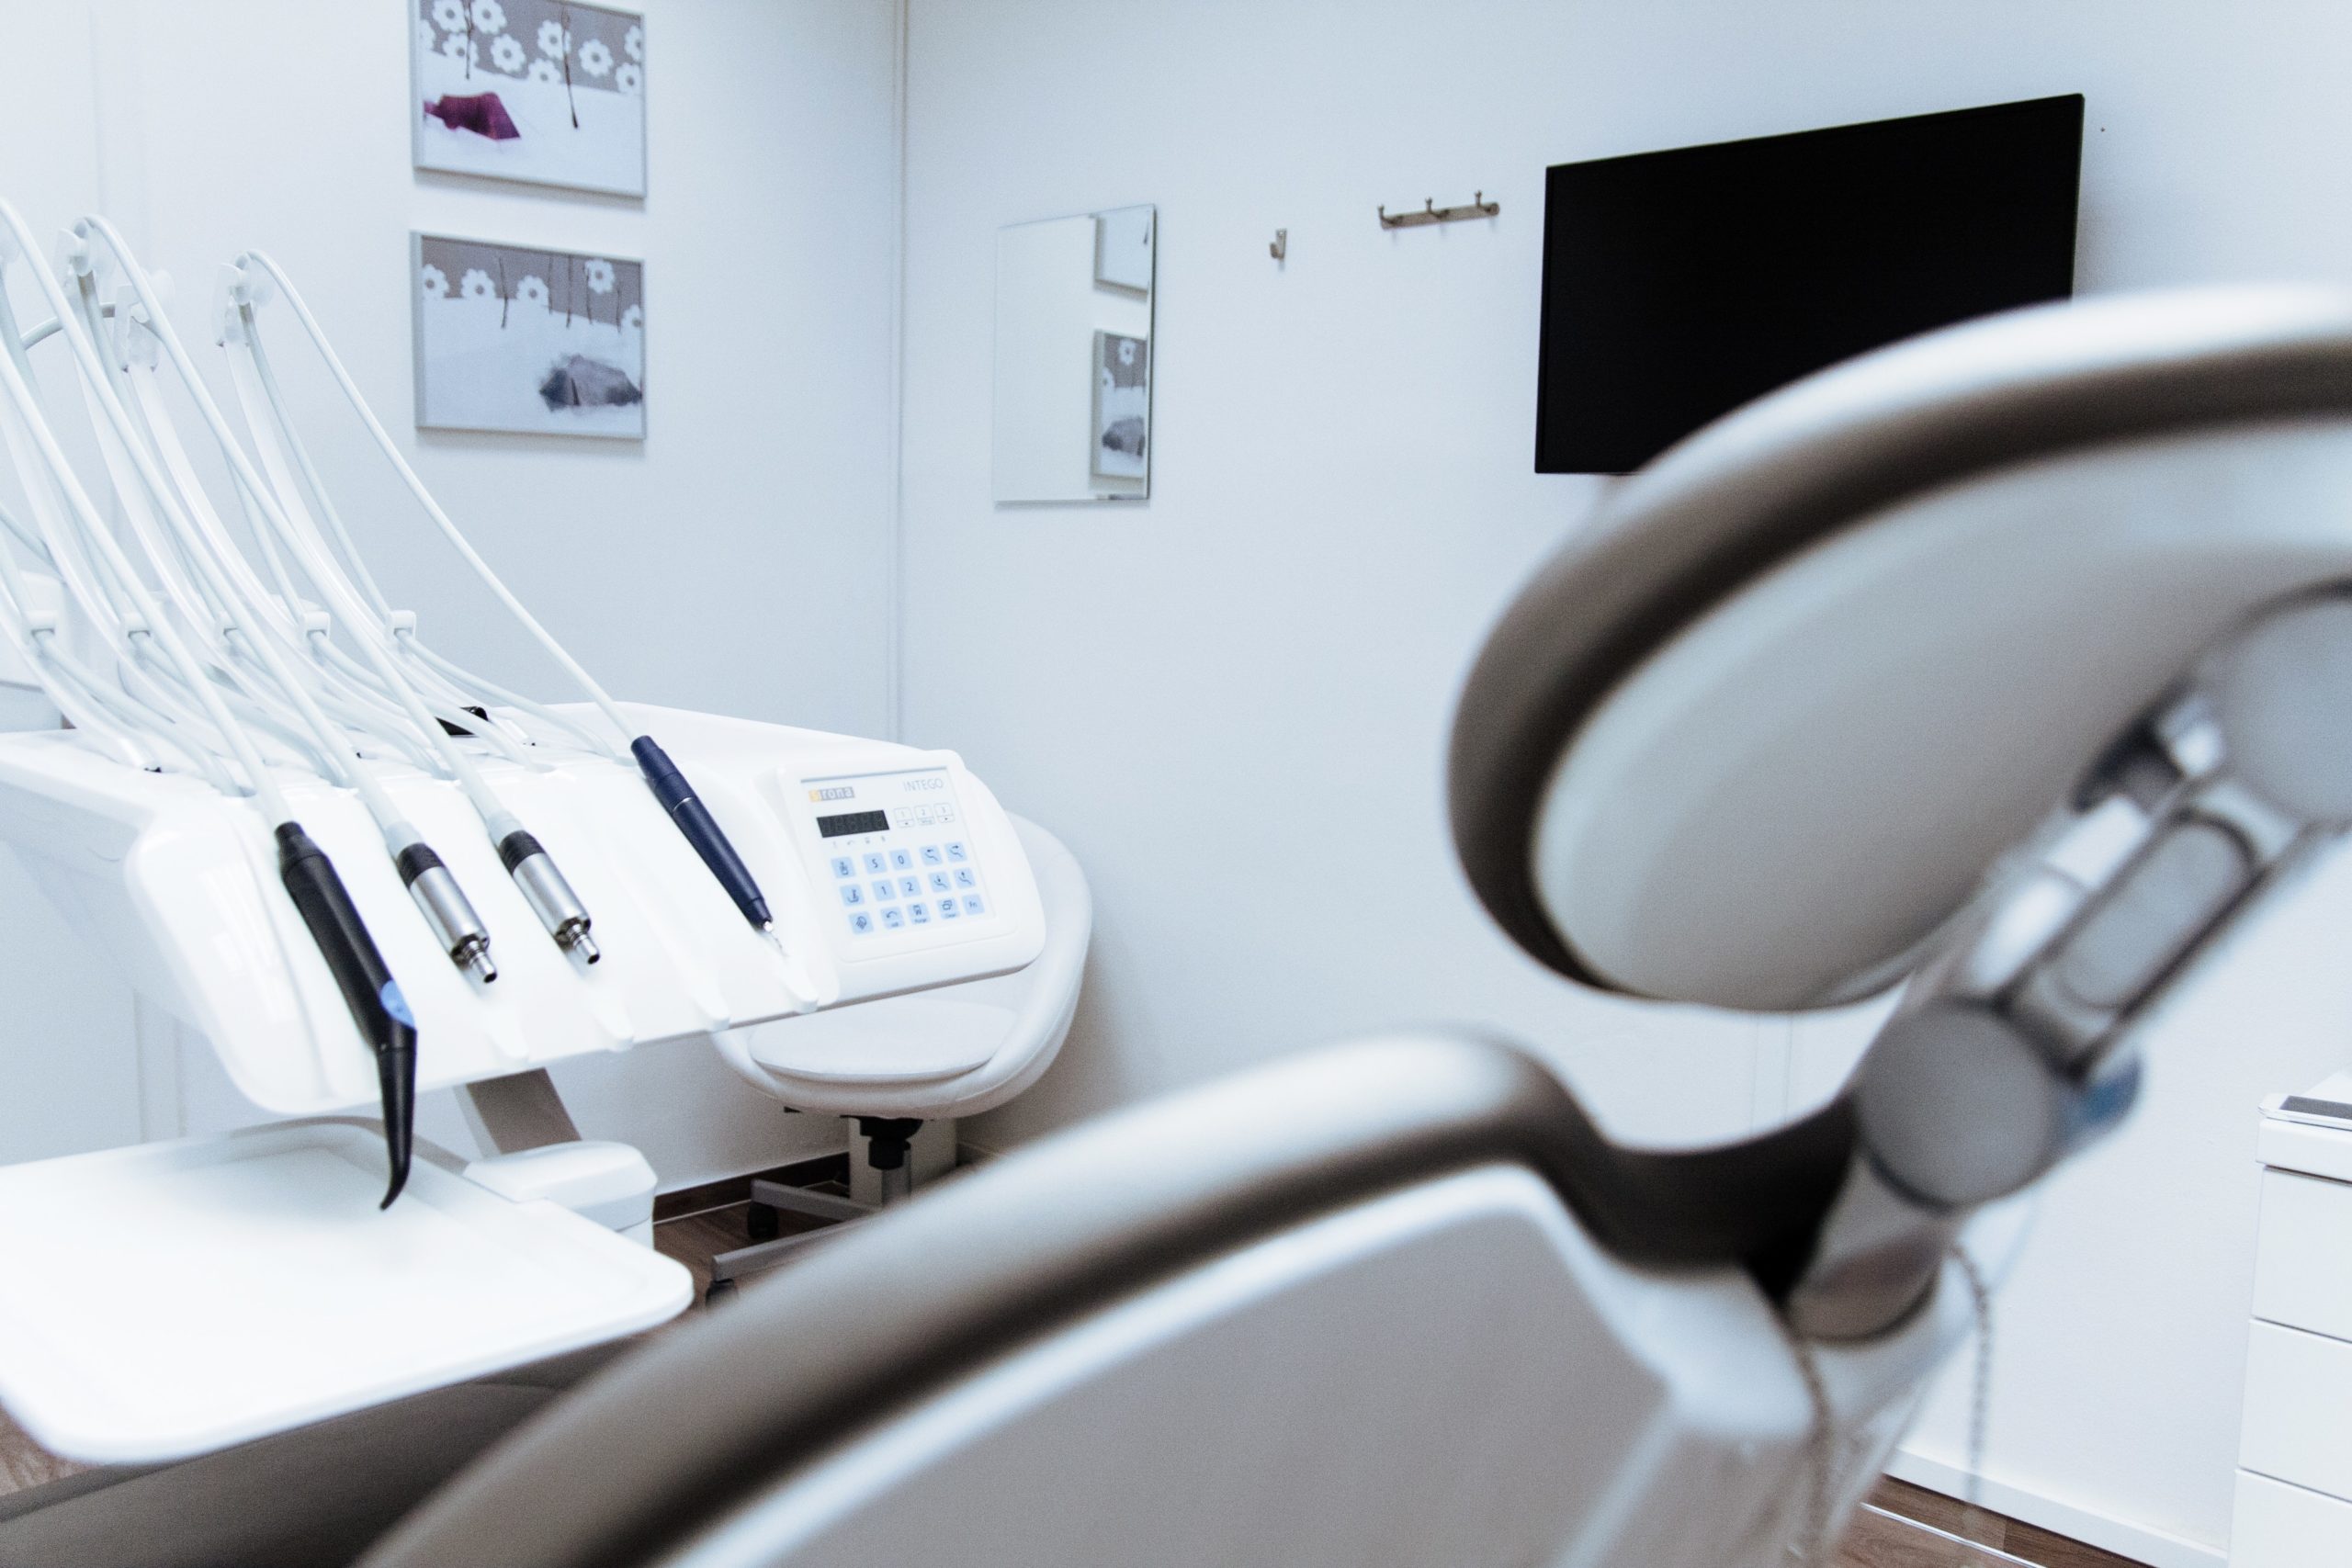 Dental chair and other equipment at a dental clinic